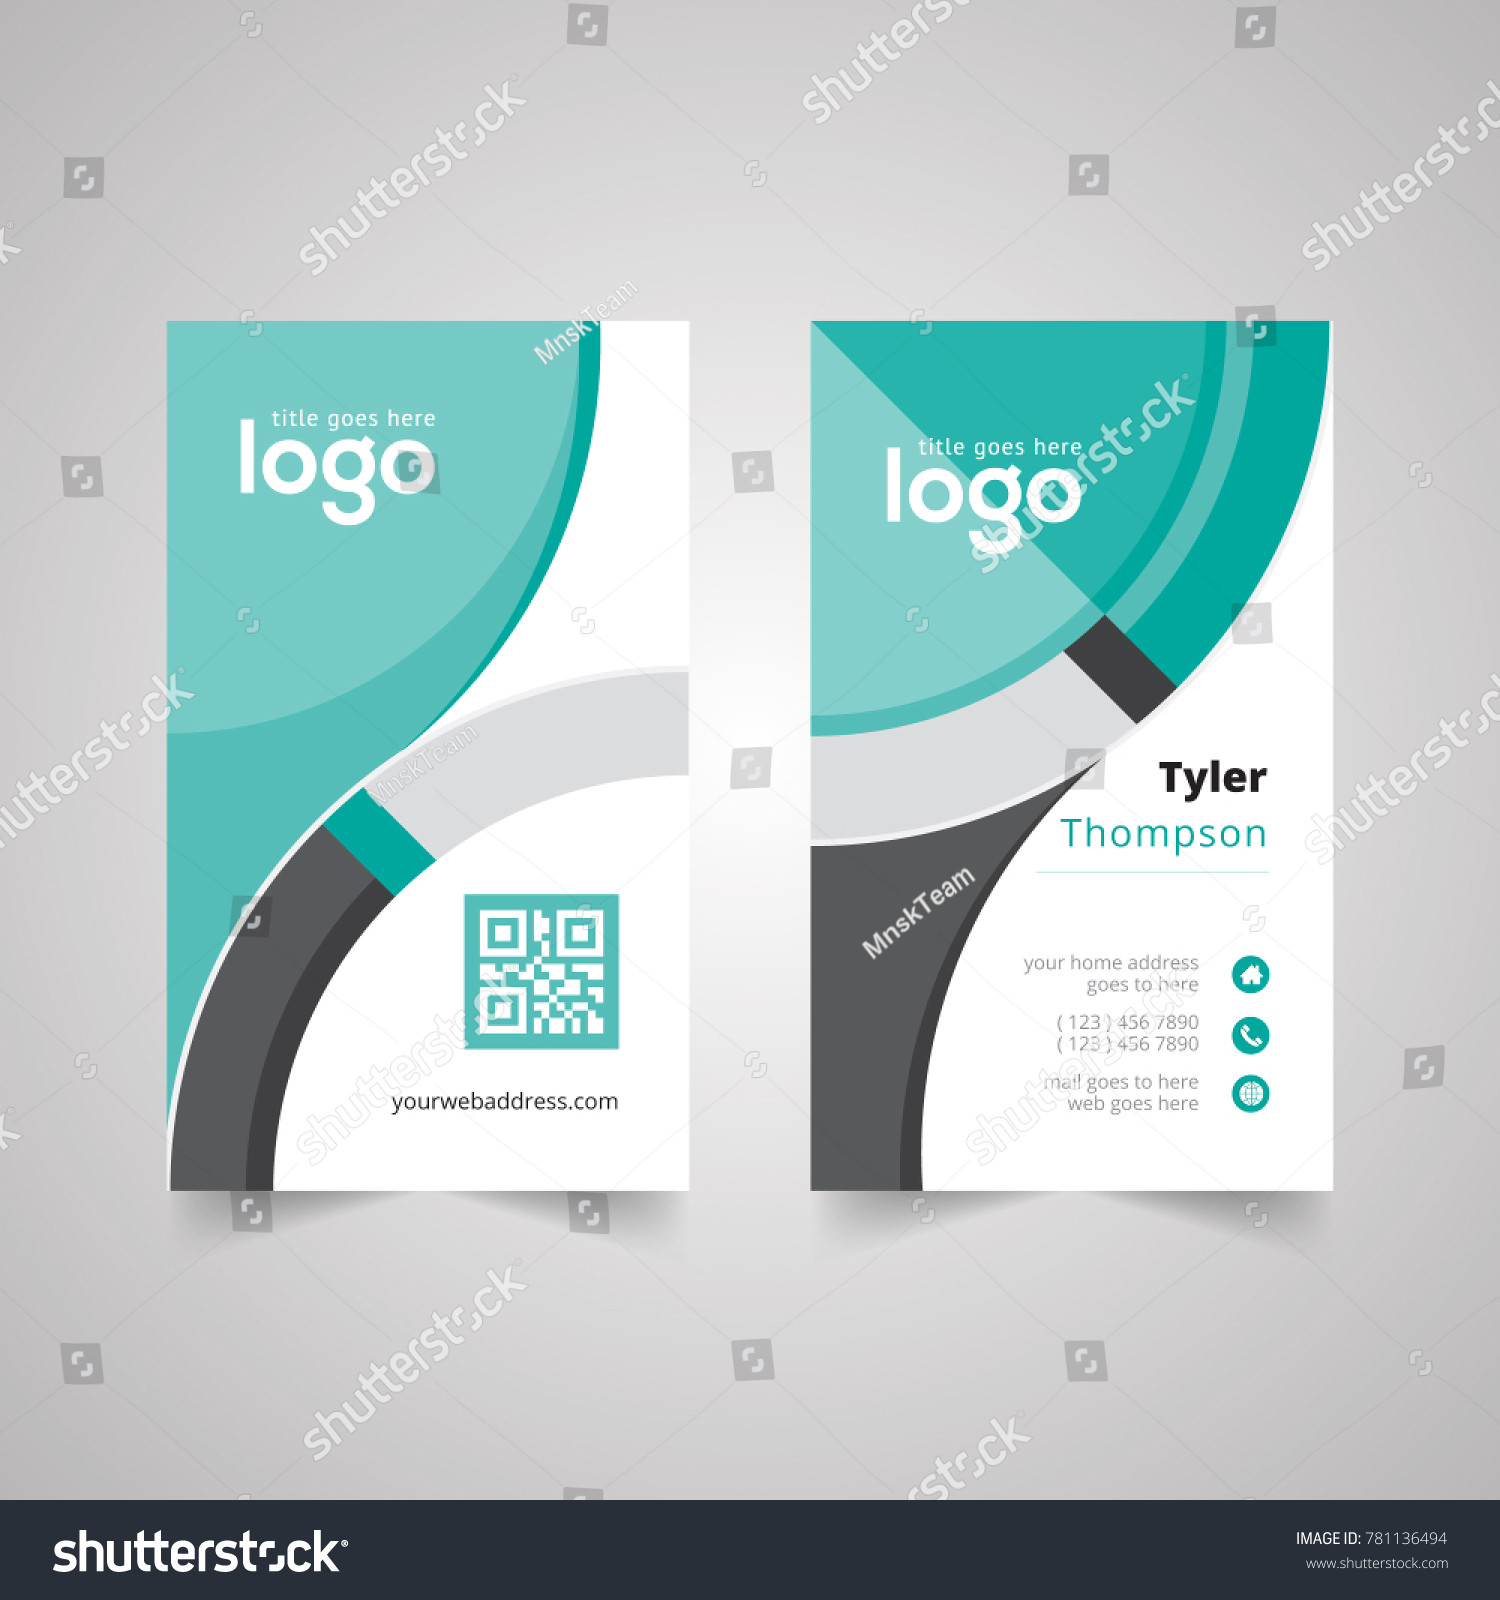 Web Developer Business Card Templates Awesome Design 42 Best Of Website Business Card Template